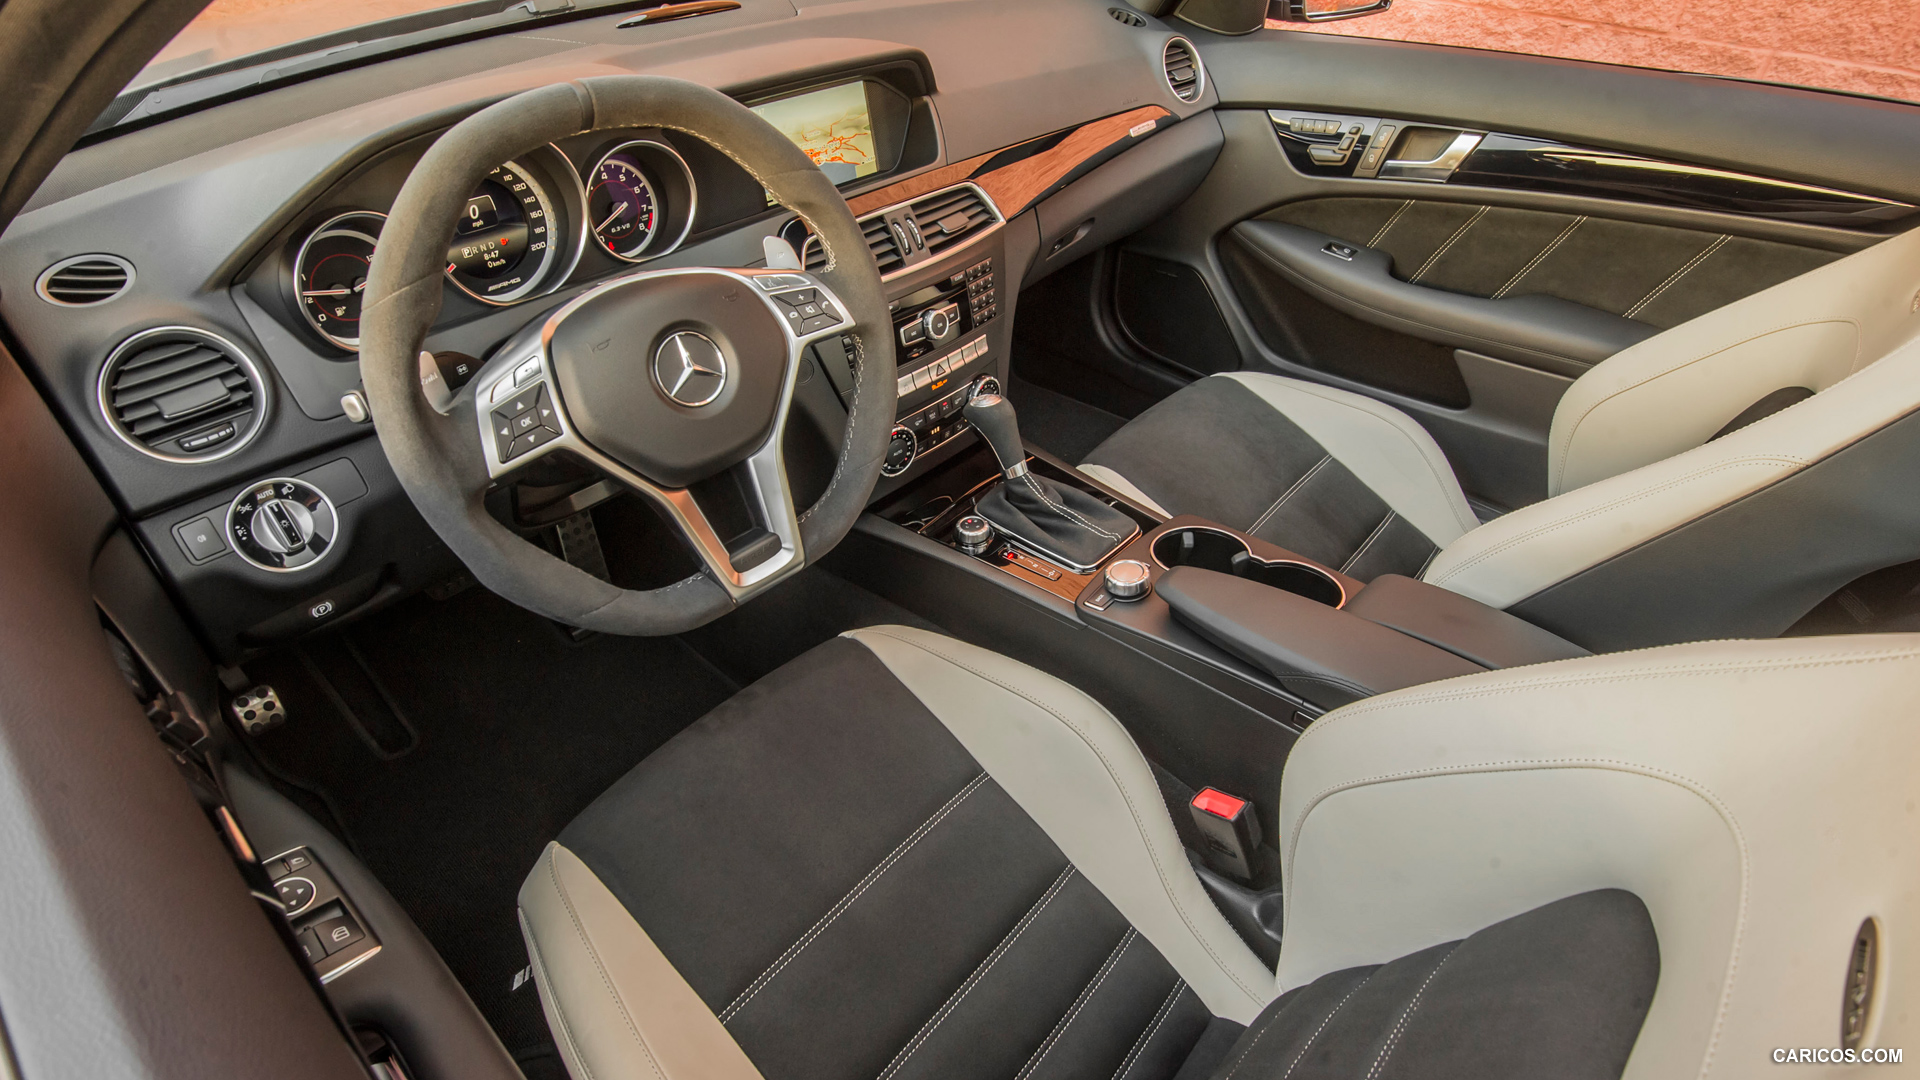 2014 Mercedes-Benz C 63 AMG Edition 507 Coupe (US Version)  - Interior, #11 of 14